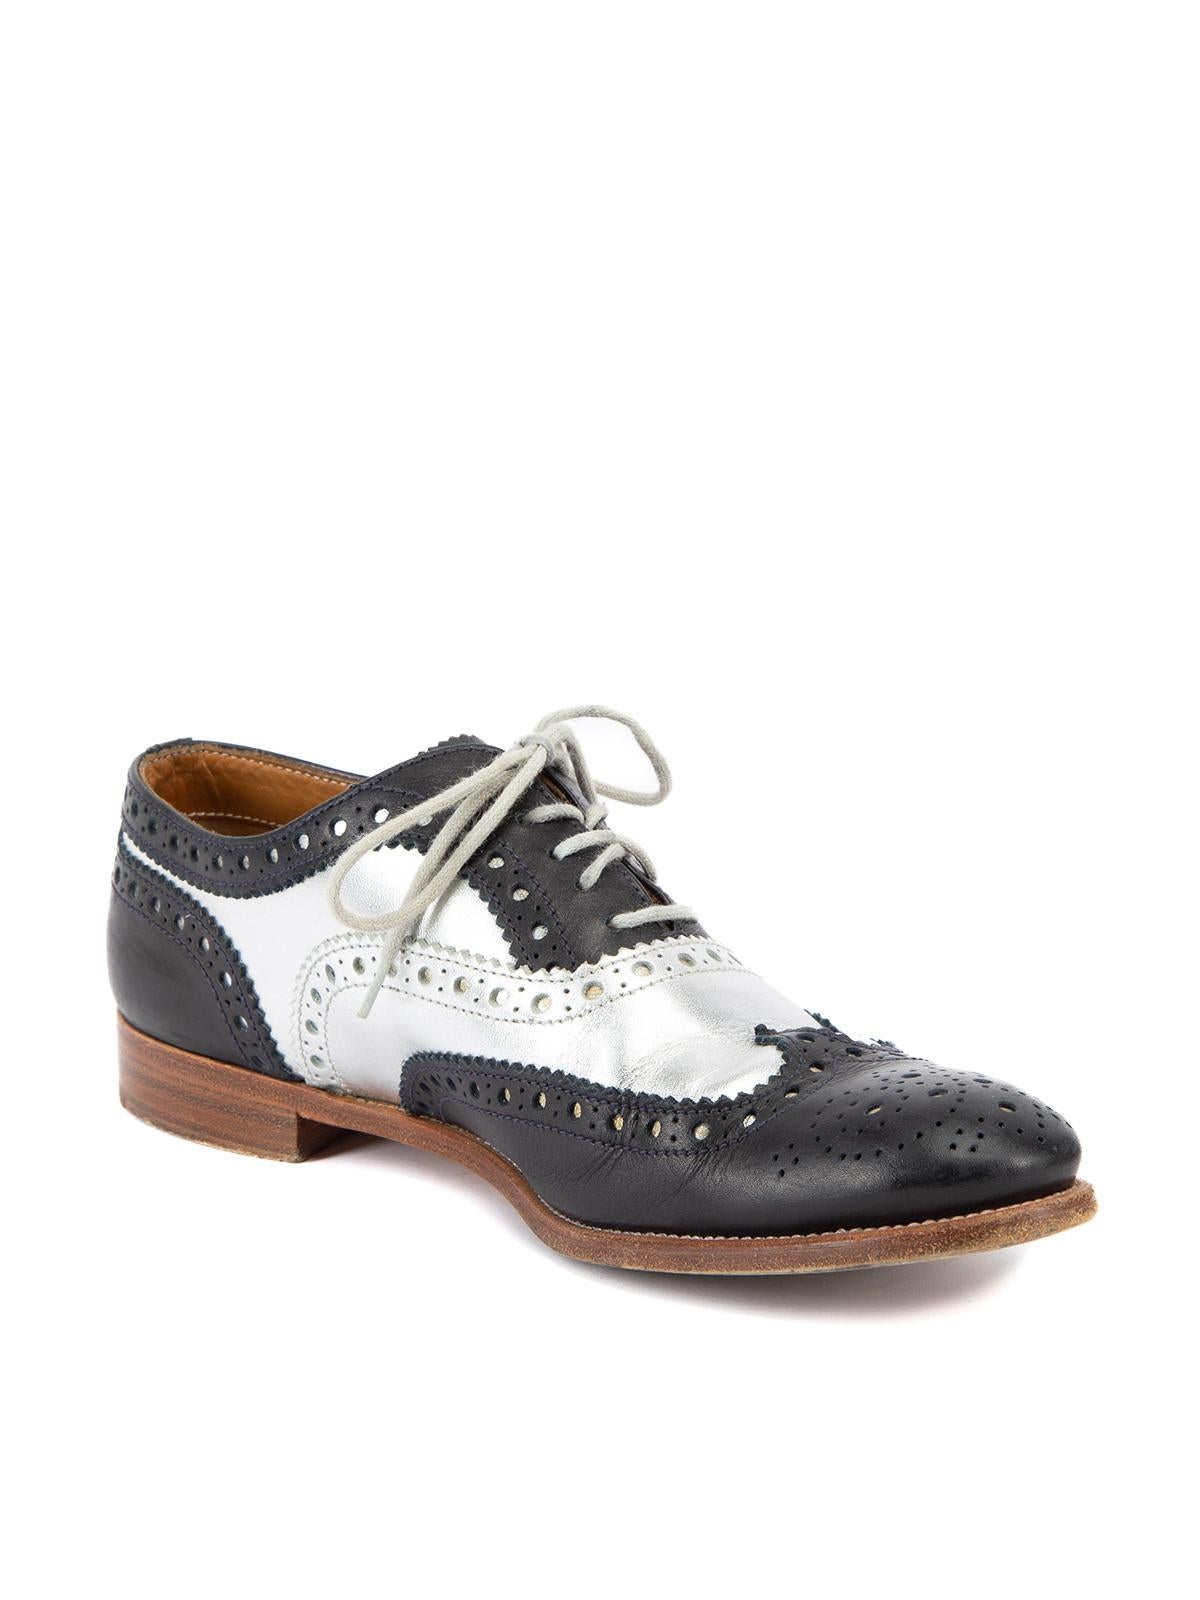 CONDITION is Good. Minor wear to brogues is evident. Light wear to the outsole and leather exterior where cresing and scuffs can be seen on this used Churchs designer resale item. Details Black and silver Leather Lace up Oxford Almond toe Flat heel